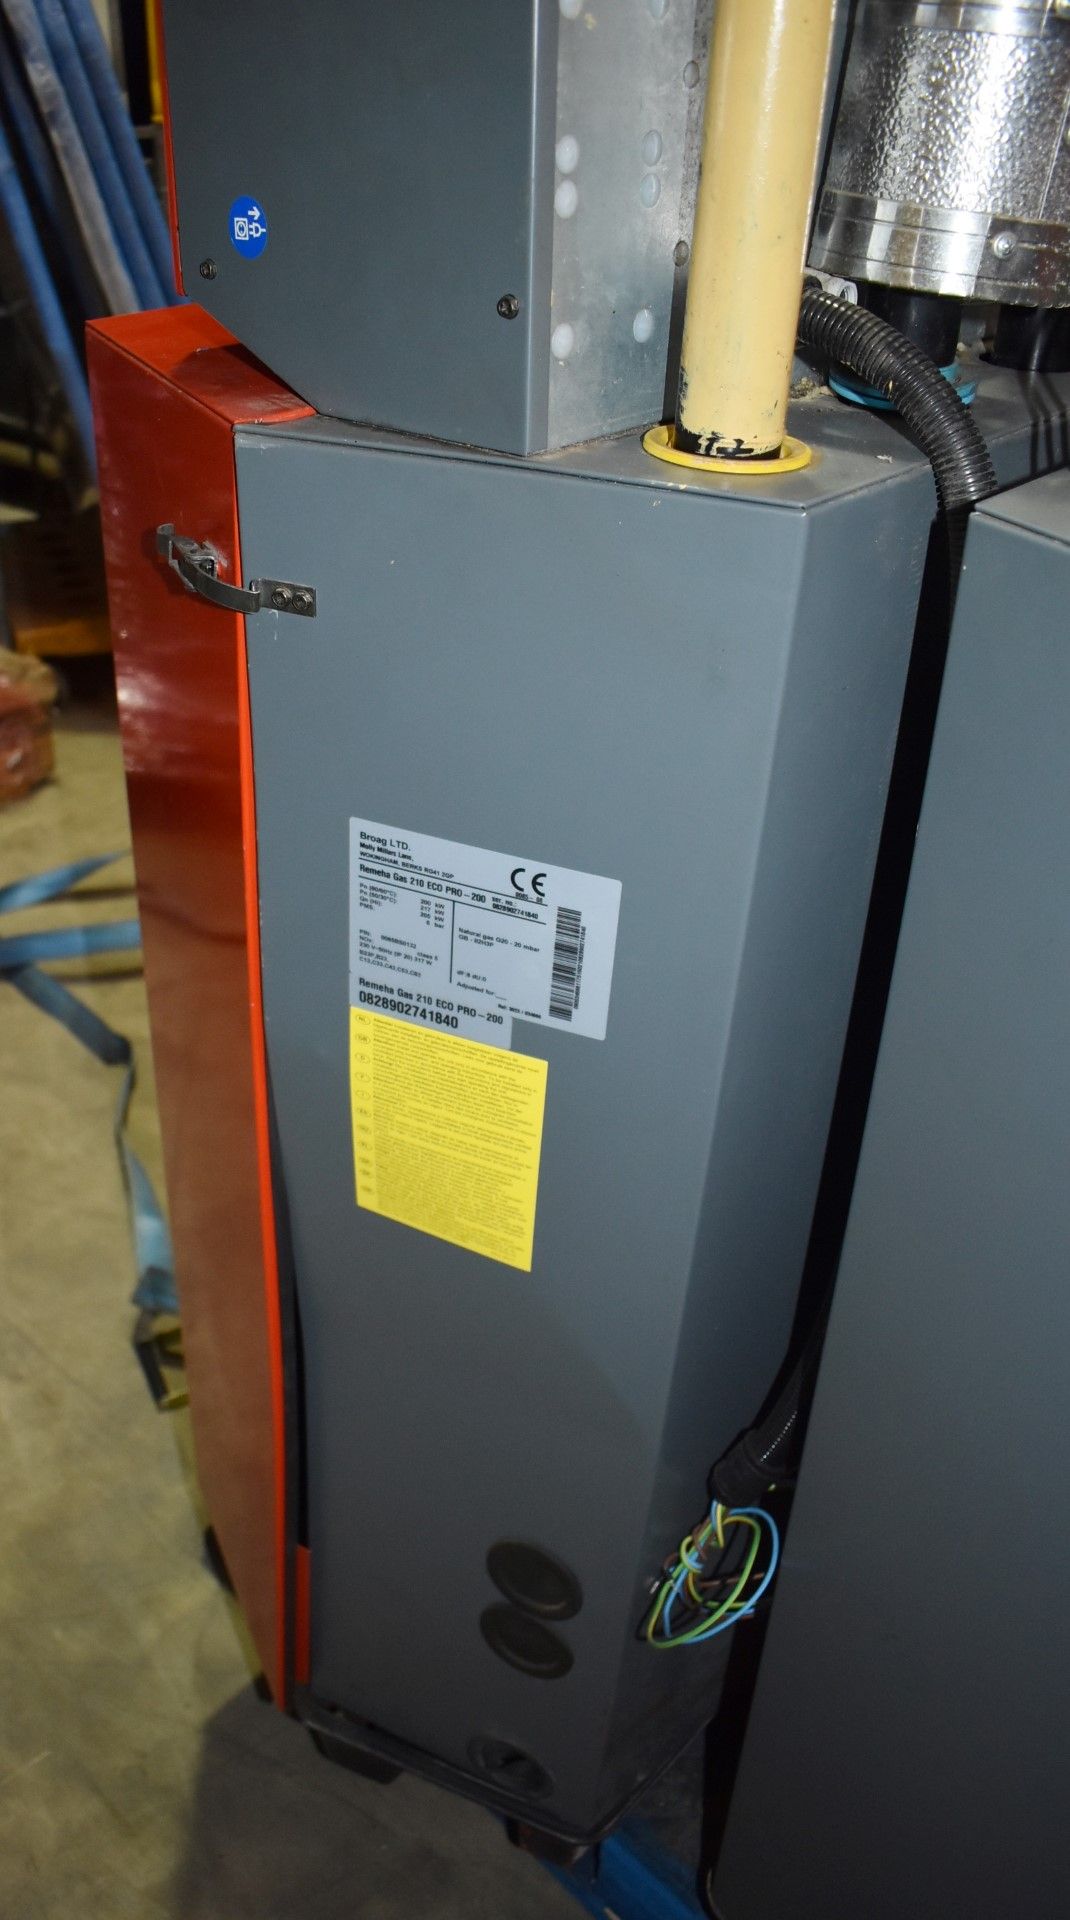 1 x Brohag Remeha Gas 210 Eco Pro Floor Standing Commercial Boiler - Ref: WH2-140 H7B - CL711 - - Image 3 of 11